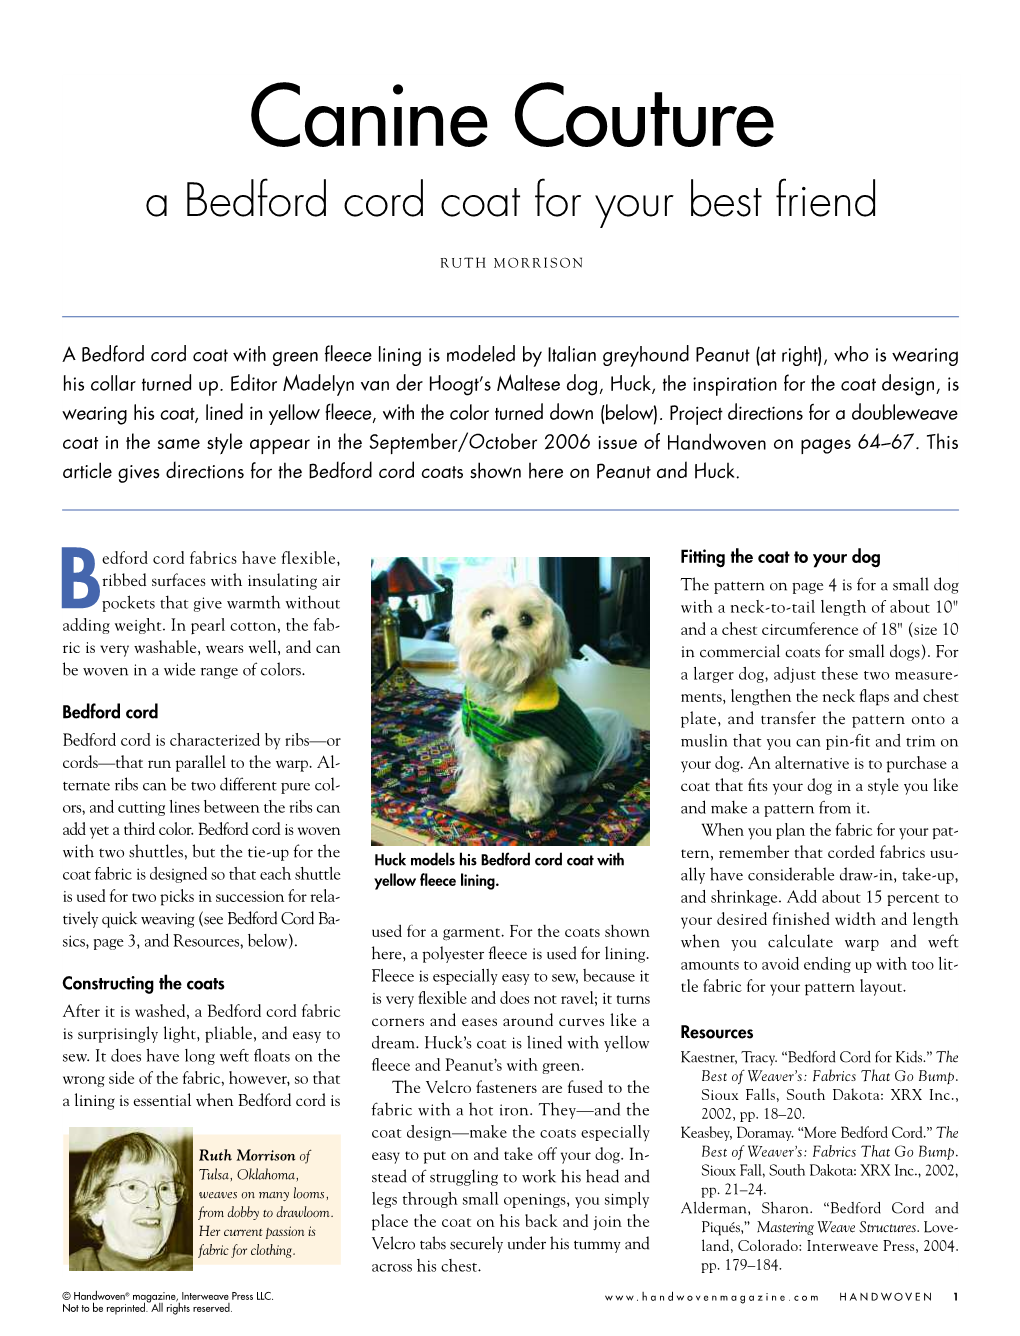 Bedford Cord Coat for Your Best Friend